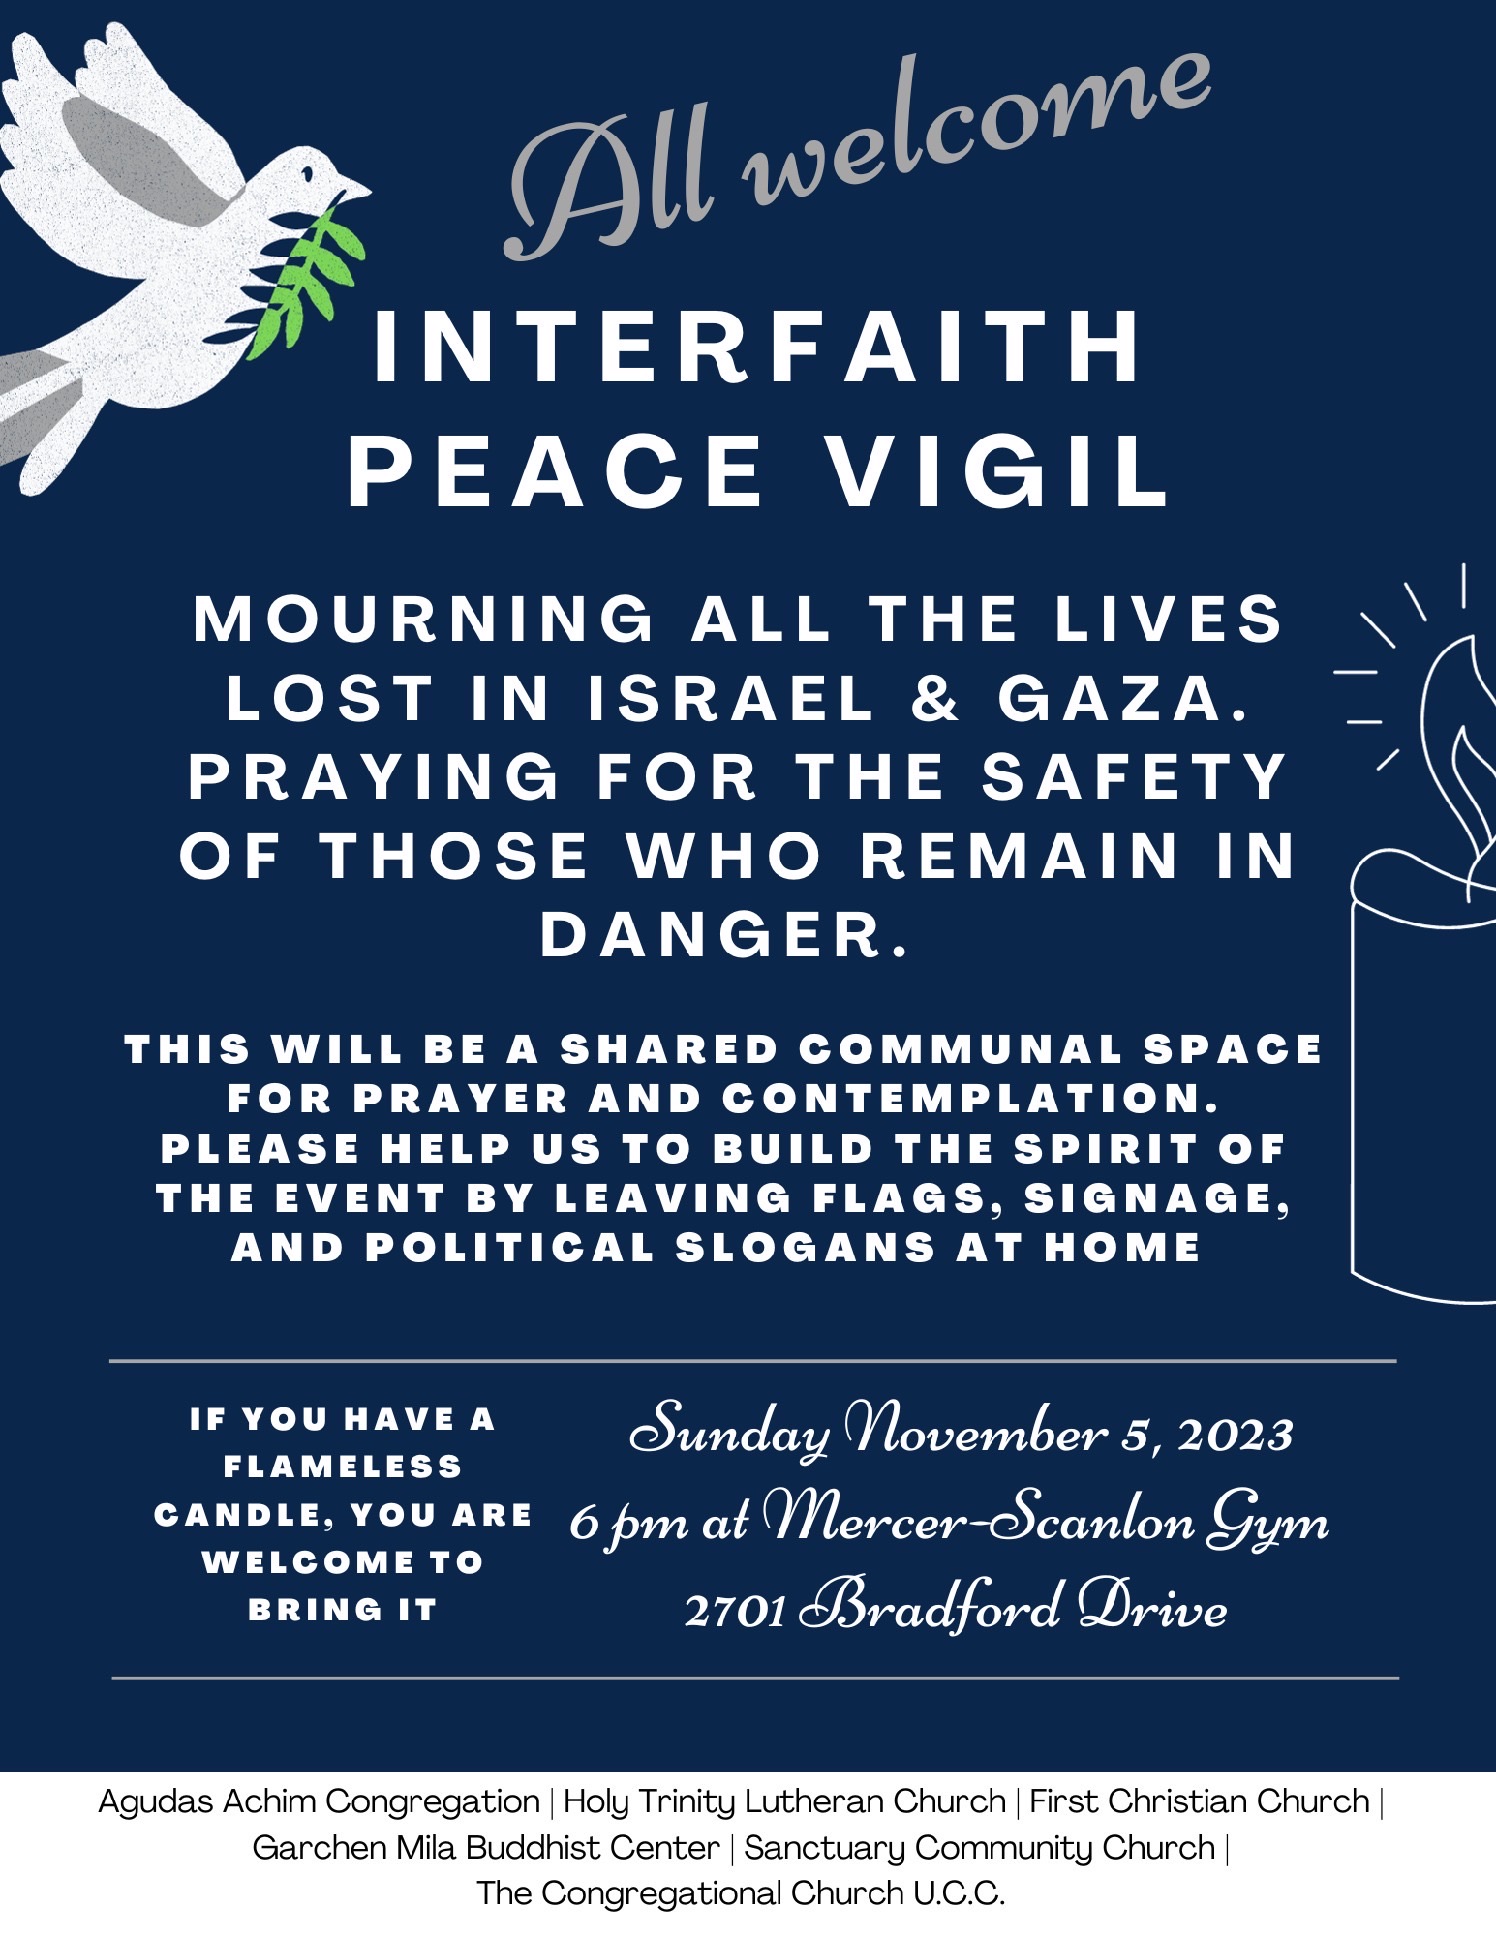 All welcome: Interfaith peace vigil. Mourning all the lives lost in Israel & Gaza. Praying for the safety of those who remain in danger. This will be a shared communal space for prayer and contemplation. Please help us to build the spirit of the event by leaving flags, signage, and political slogans at home. If you have a flameless candle, you are welcome to bring it. Sunday November 5, 2023, 6 pm at Mercer-Scanlon Gym, 2701 Bradford Drive. Organized by: Agudas Achim Congregation, Holy Trinity Lutheran Church, First Christian Church, Garchen Mila Buddhist Center, Sanctuary Community Church, The Congregational Church U.C.C.